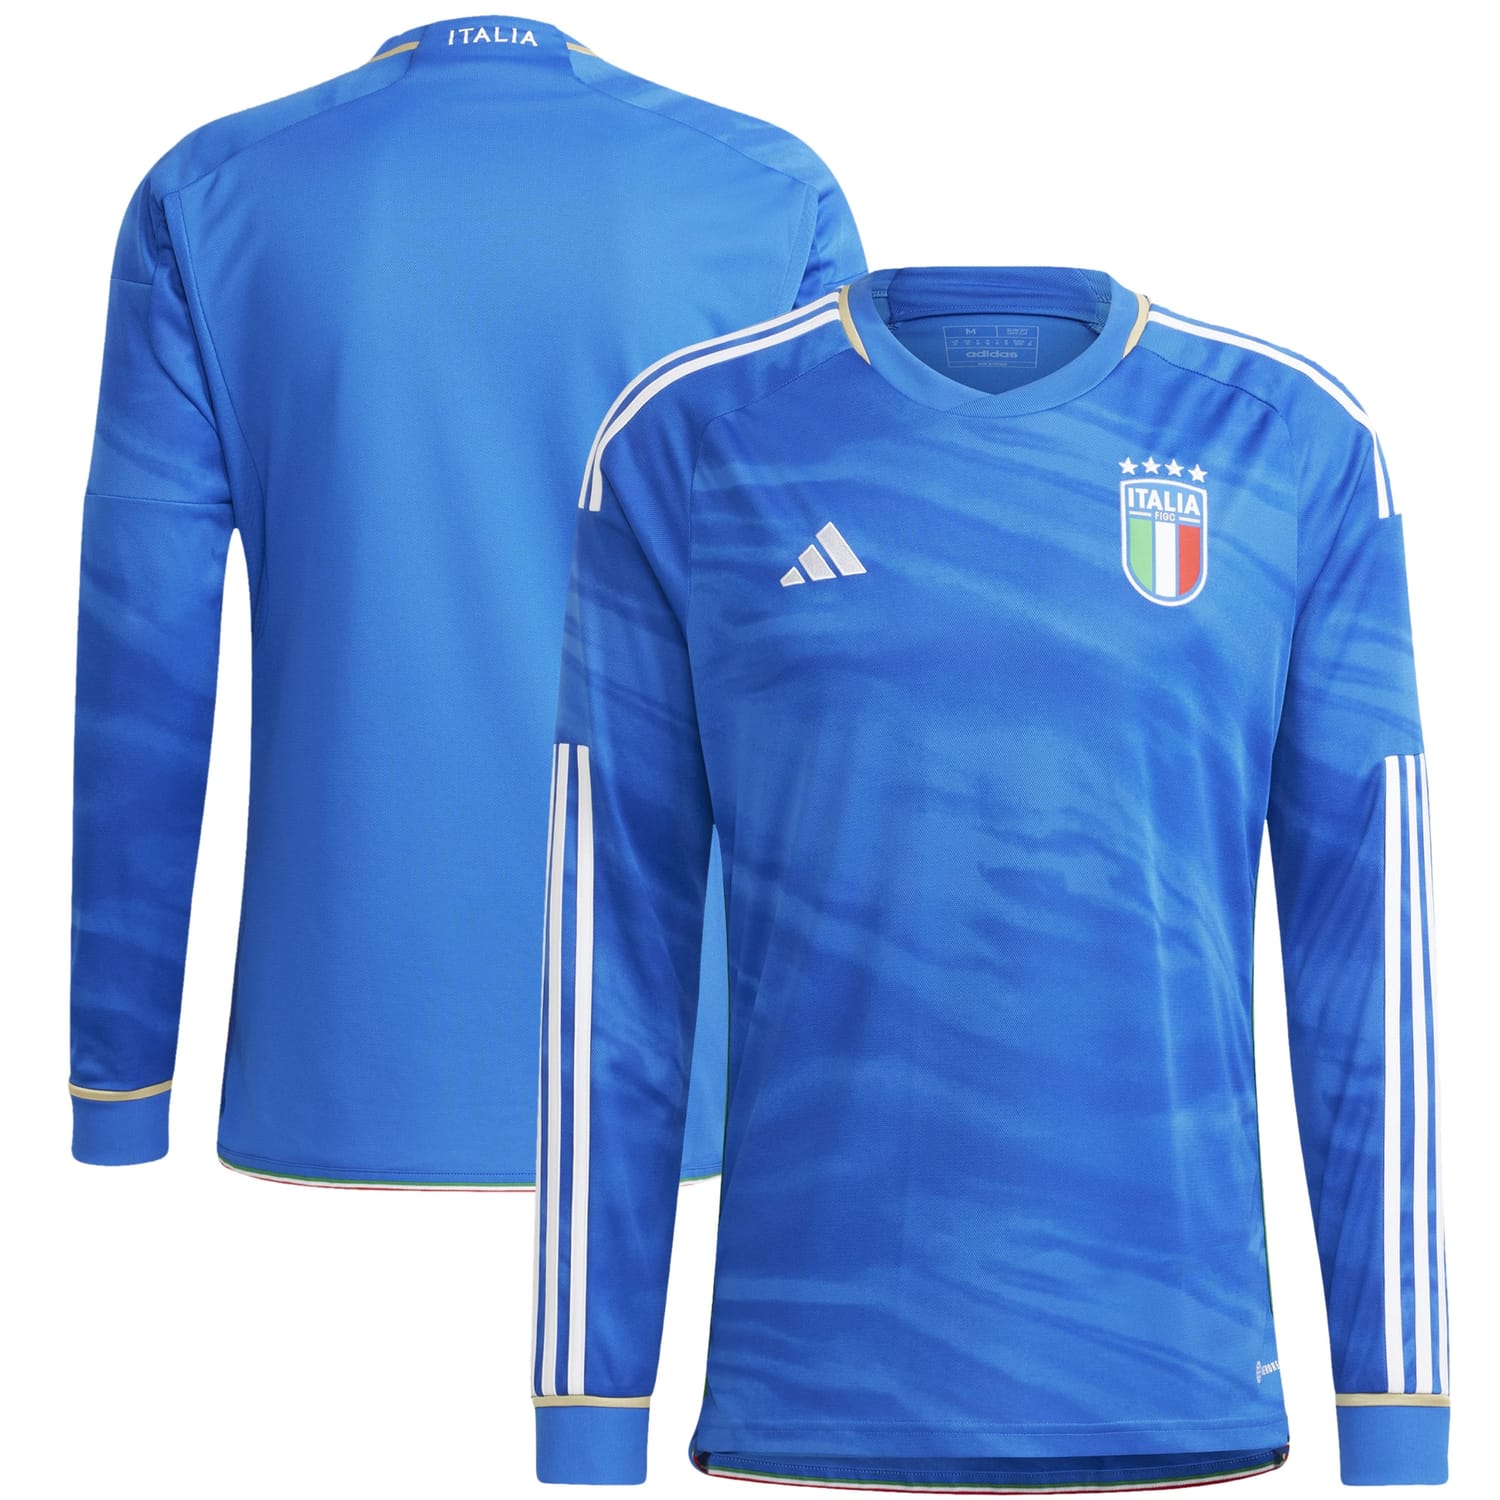 Italy National Team Home Jersey Shirt Long Sleeve for Men